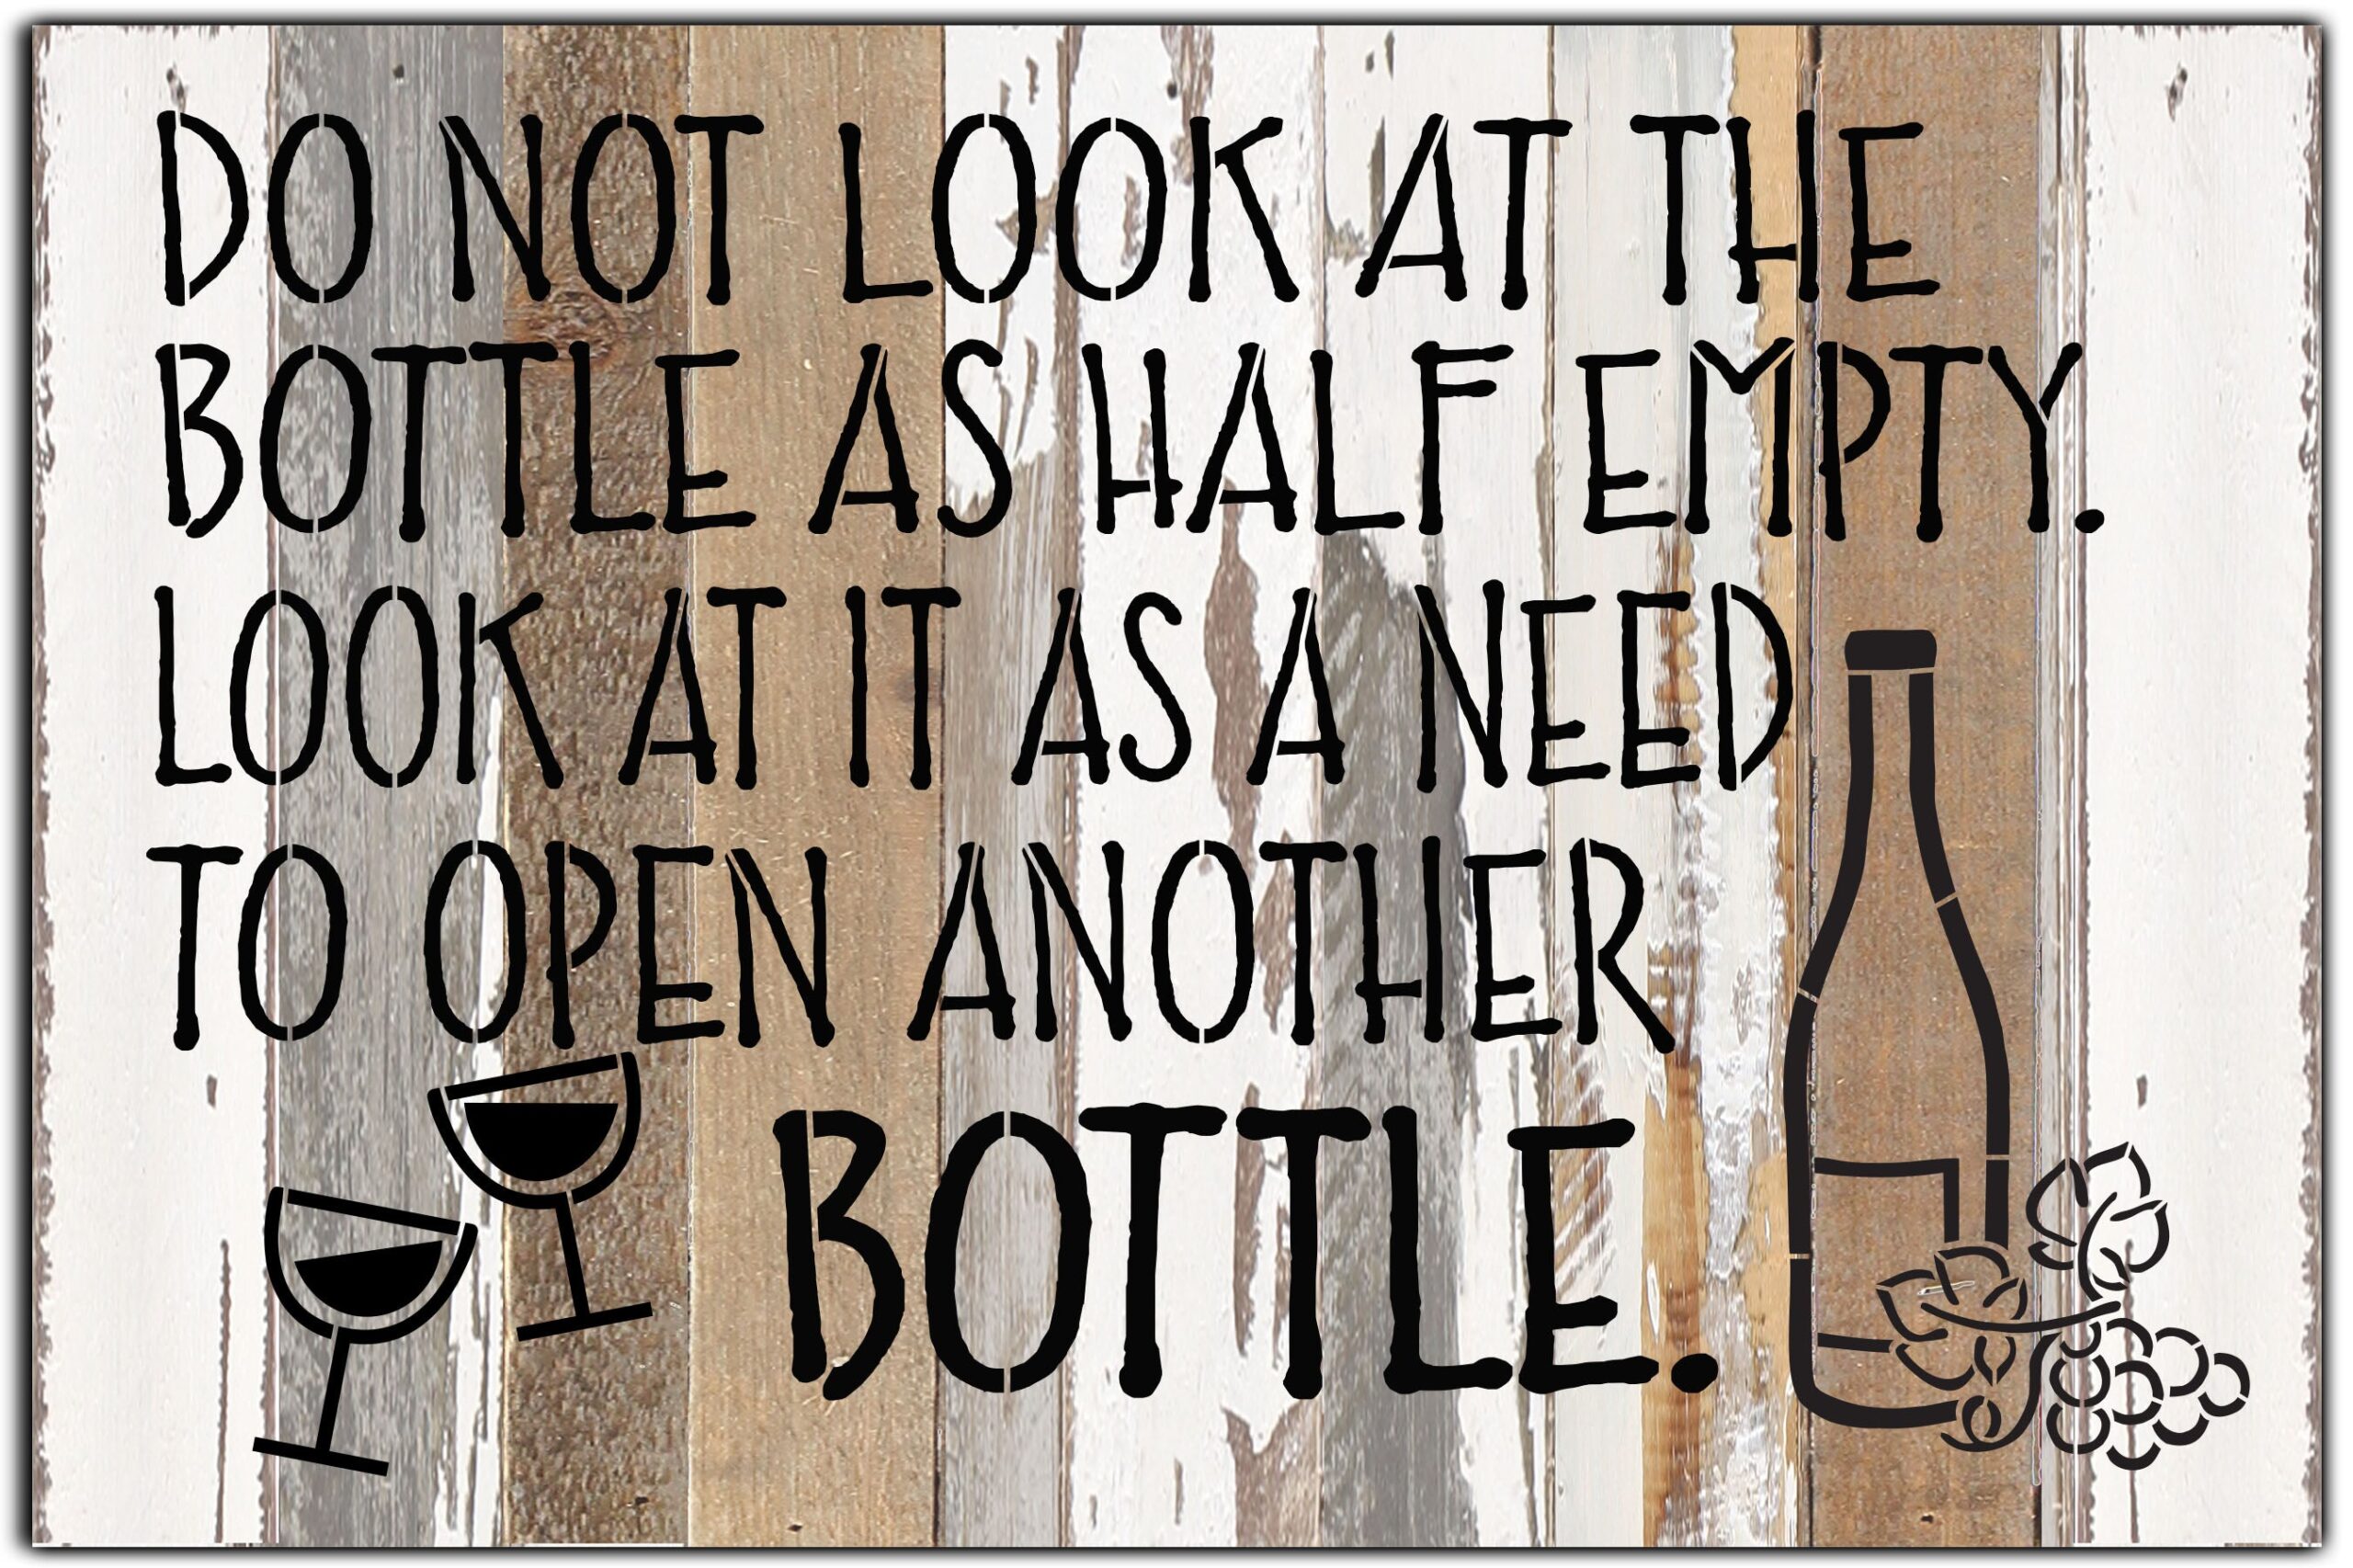 Don't look at the bottle as half empty. Look at it as a need to open another bottle. / 18x12 Reclaimed Wood Wall Art